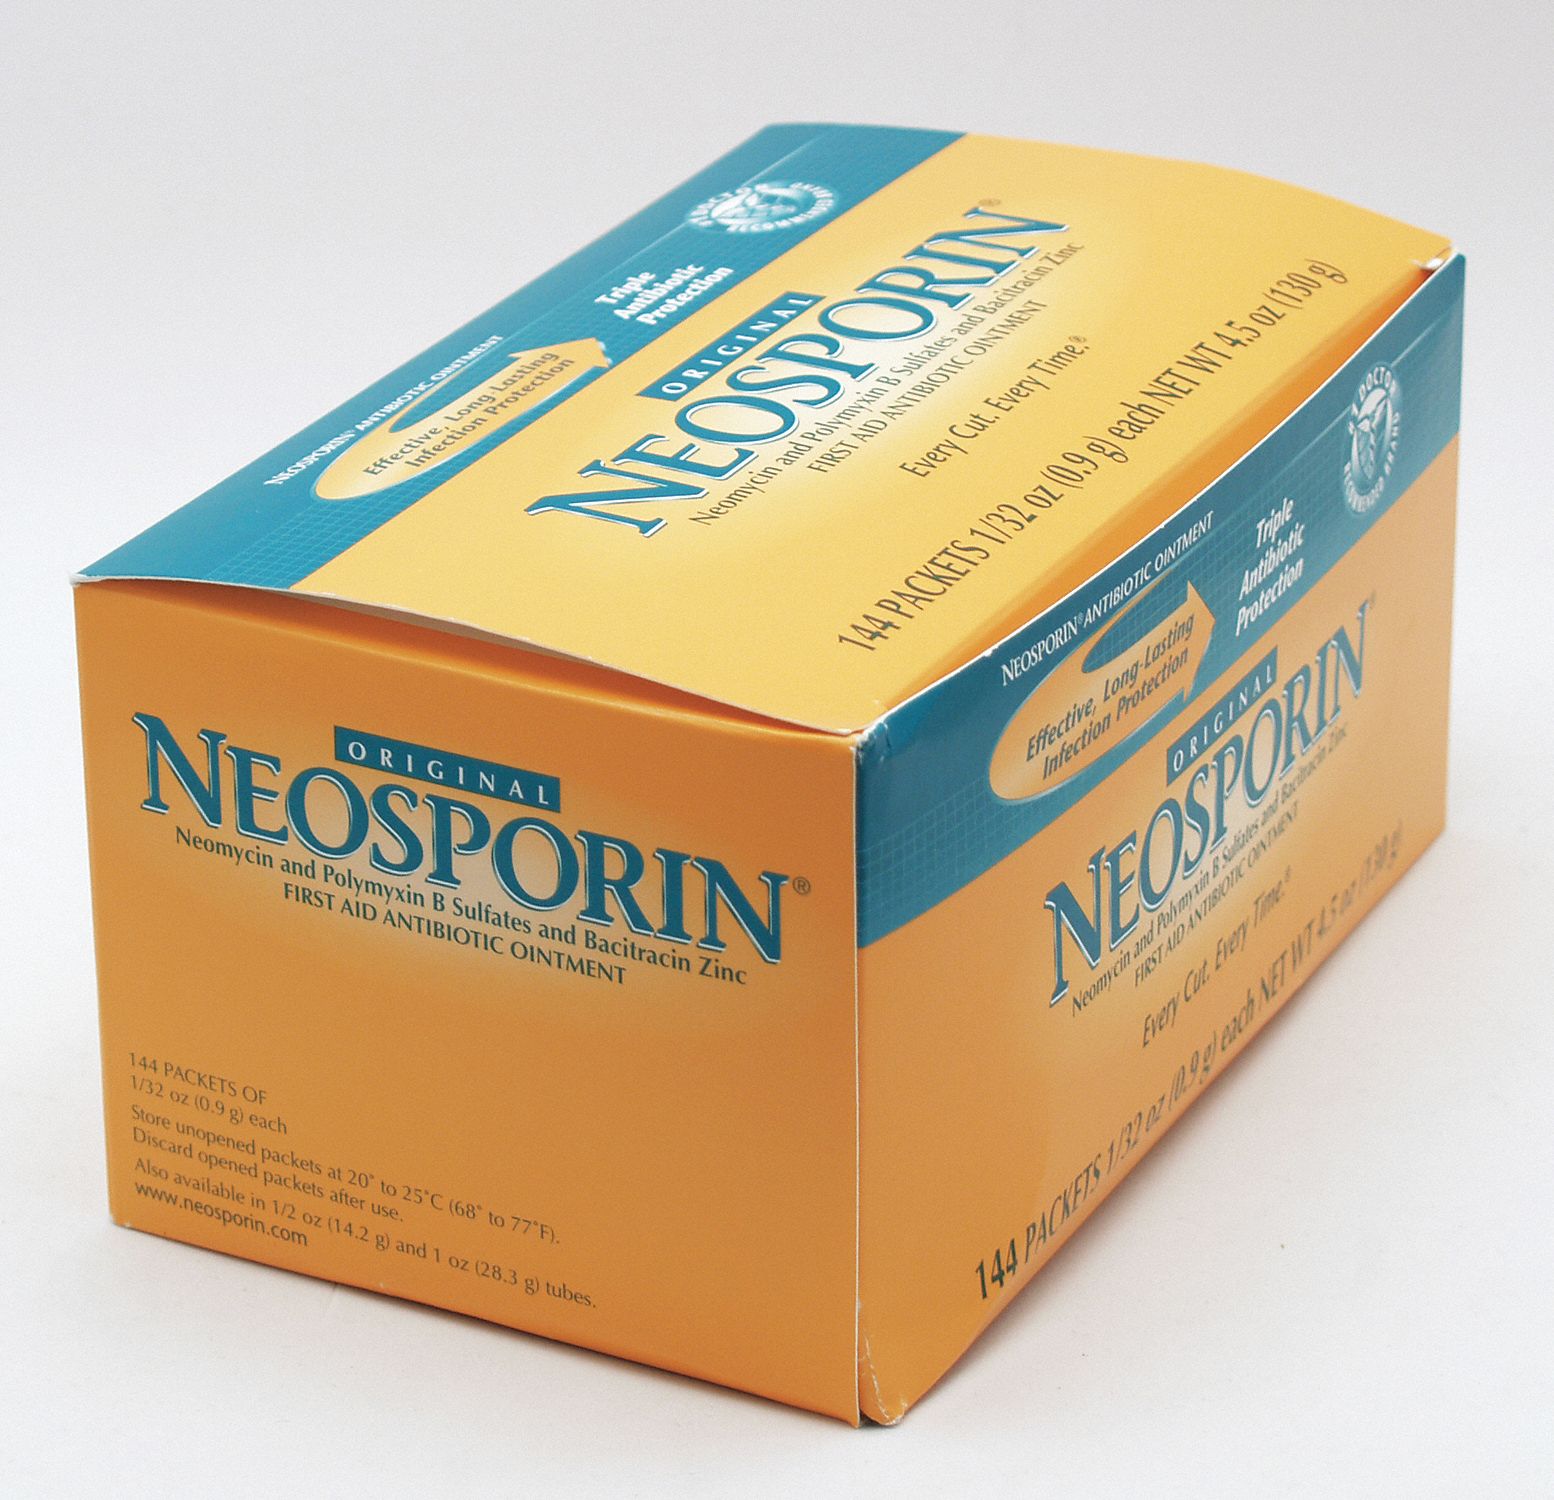 Triple Antibiotic: Ointment, Box/Wrapped Packets, Bacitracin/Neomycin/Polymyxin B, 144 PK